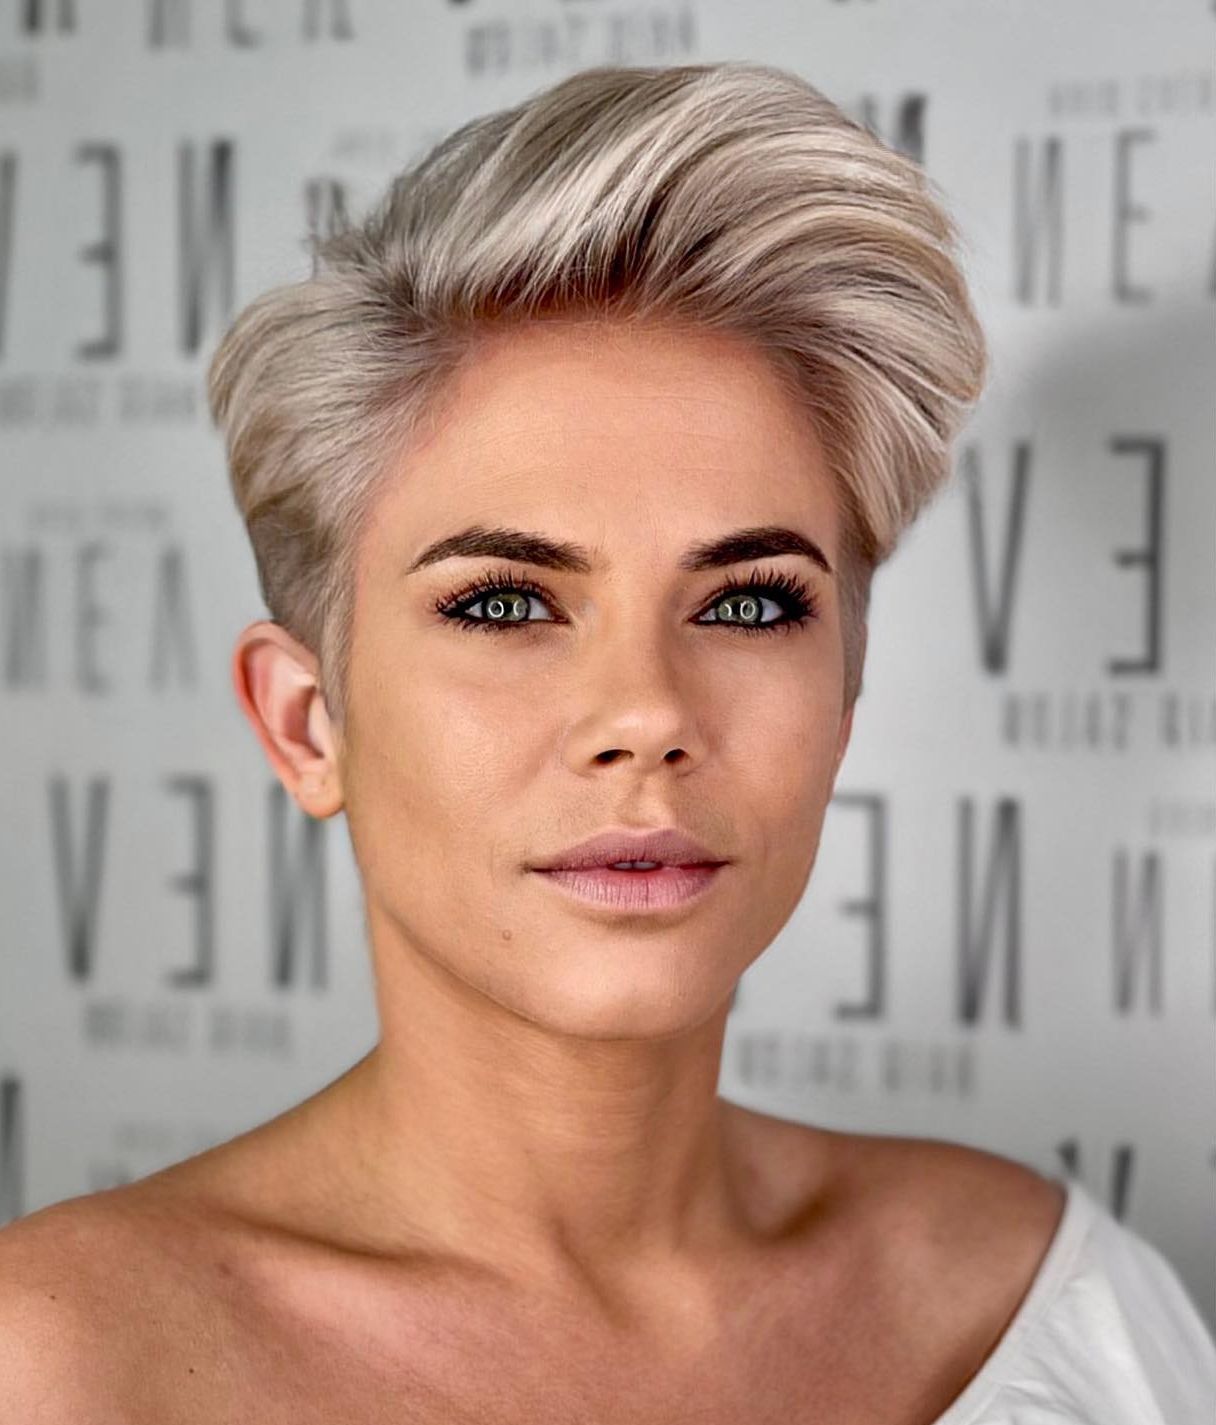 22 Exclusive Ideas To Style A Pixie Haircut – Hairstylery With Regard To Voluminous Pixie Hairstyles With Wavy Texture (View 18 of 25)